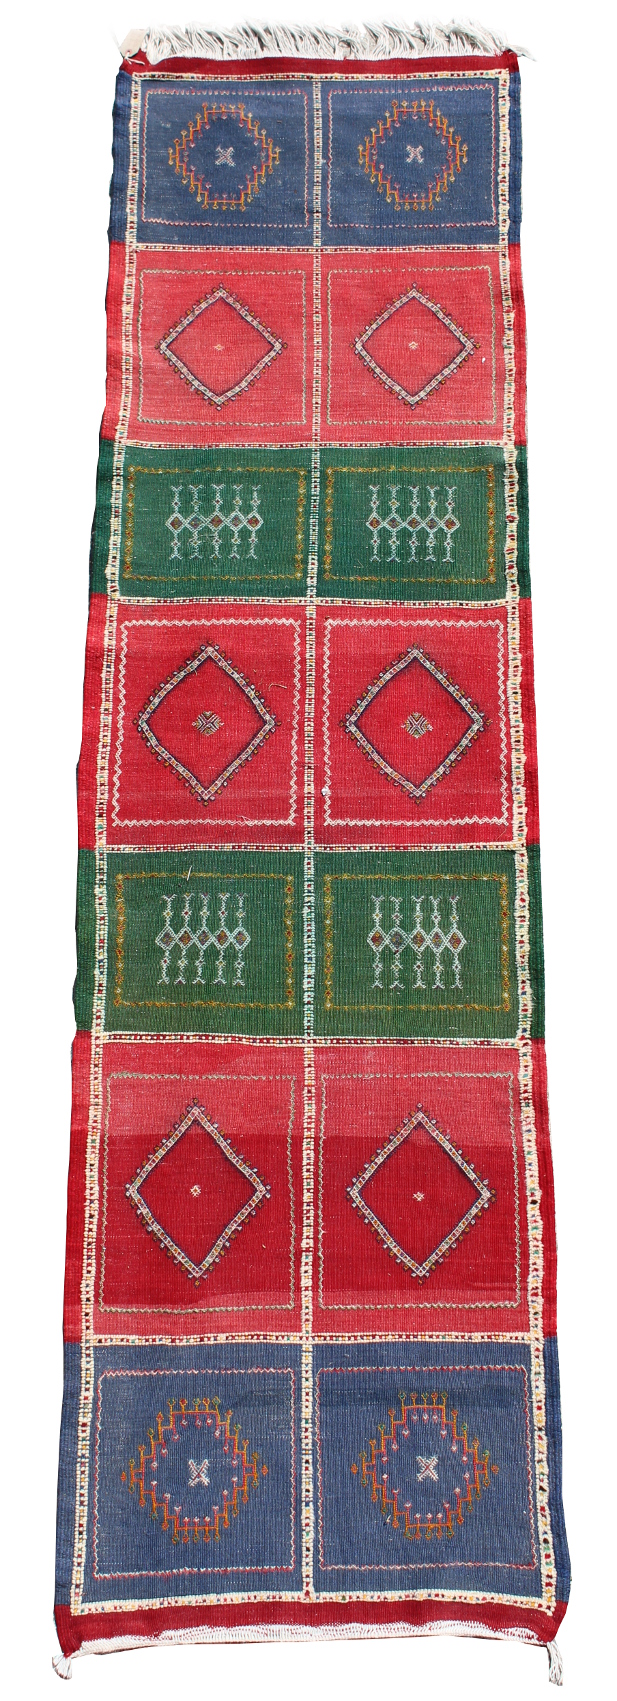 Property of a deceased estate - a North African flat-weave long rug, 107 by 29ins. (272 by